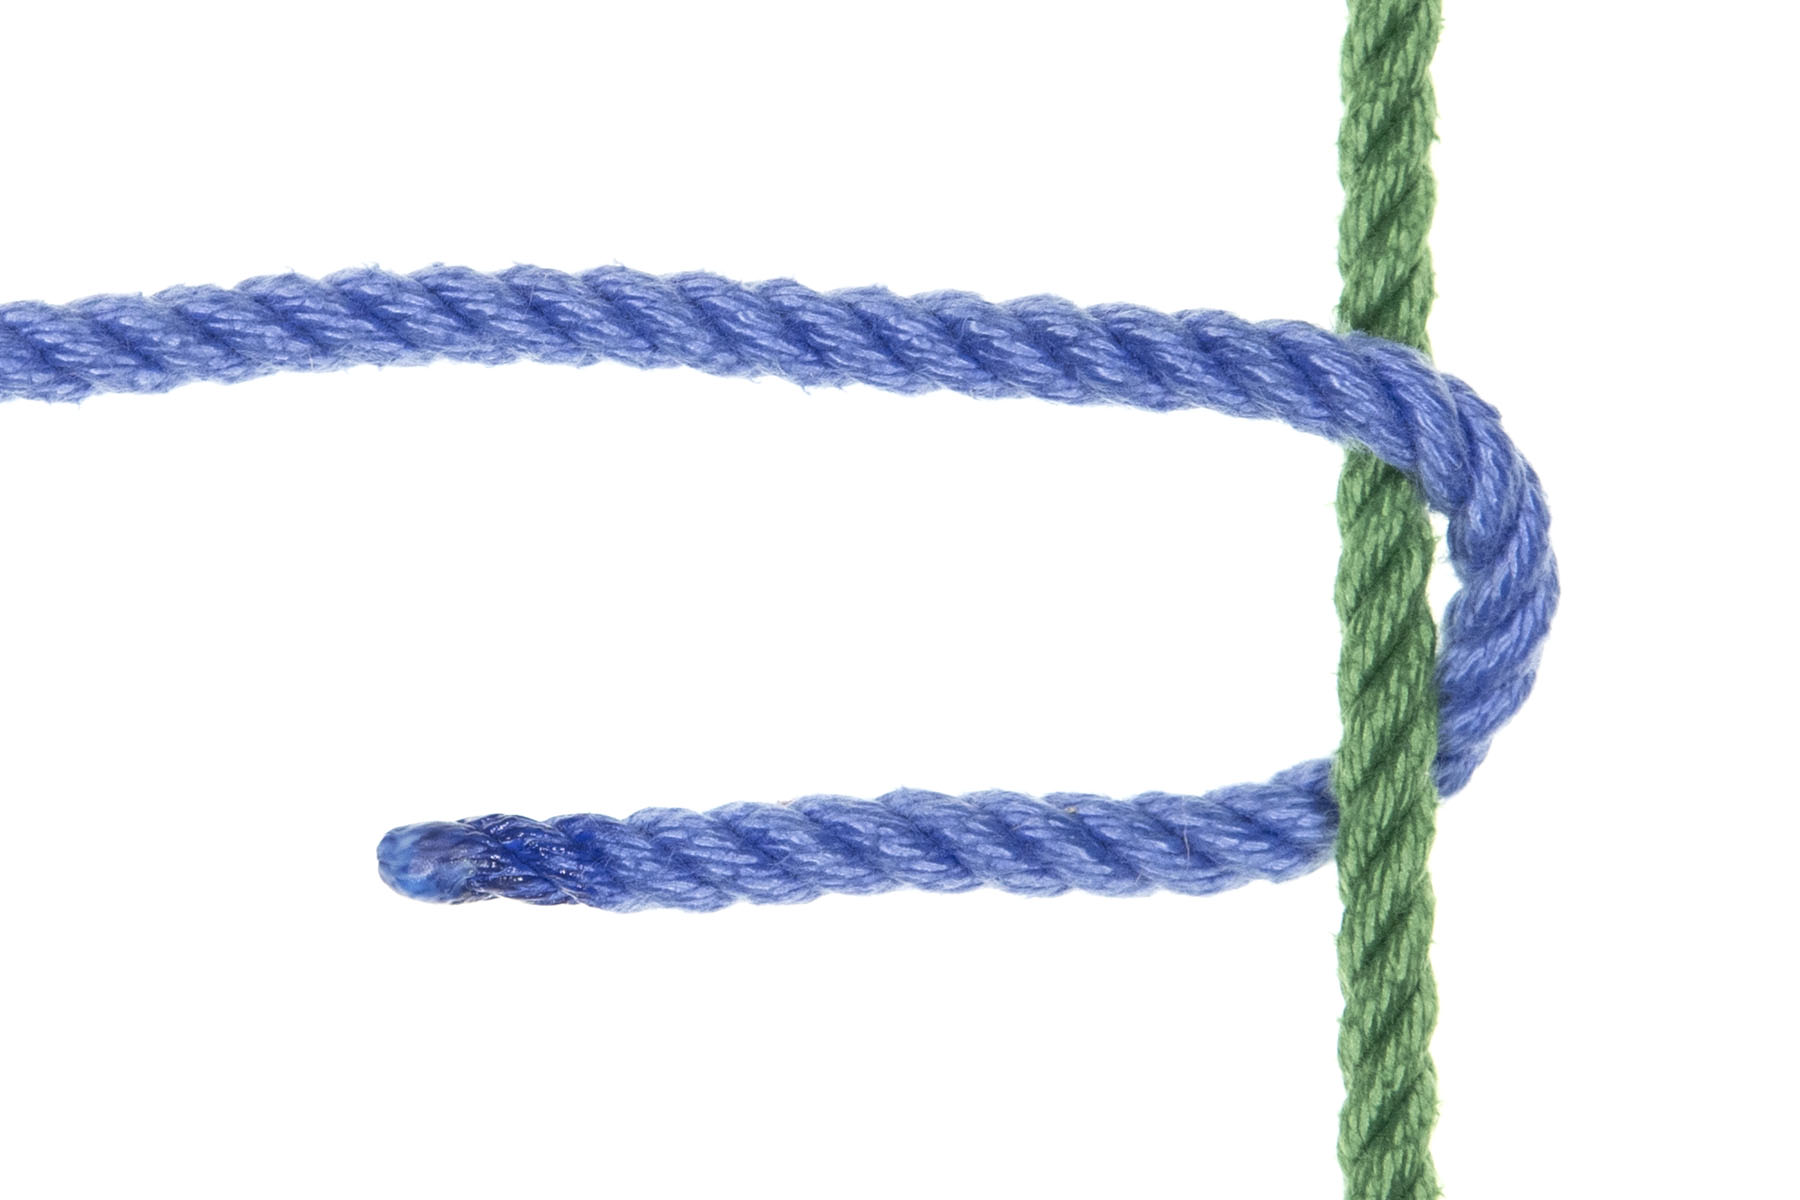 A single green rope passes vertically through the frame. A blue rope enters from the left of the frame and crosses over the green rope. It then doubles back, crossing under the green rope below where it crossed over it.